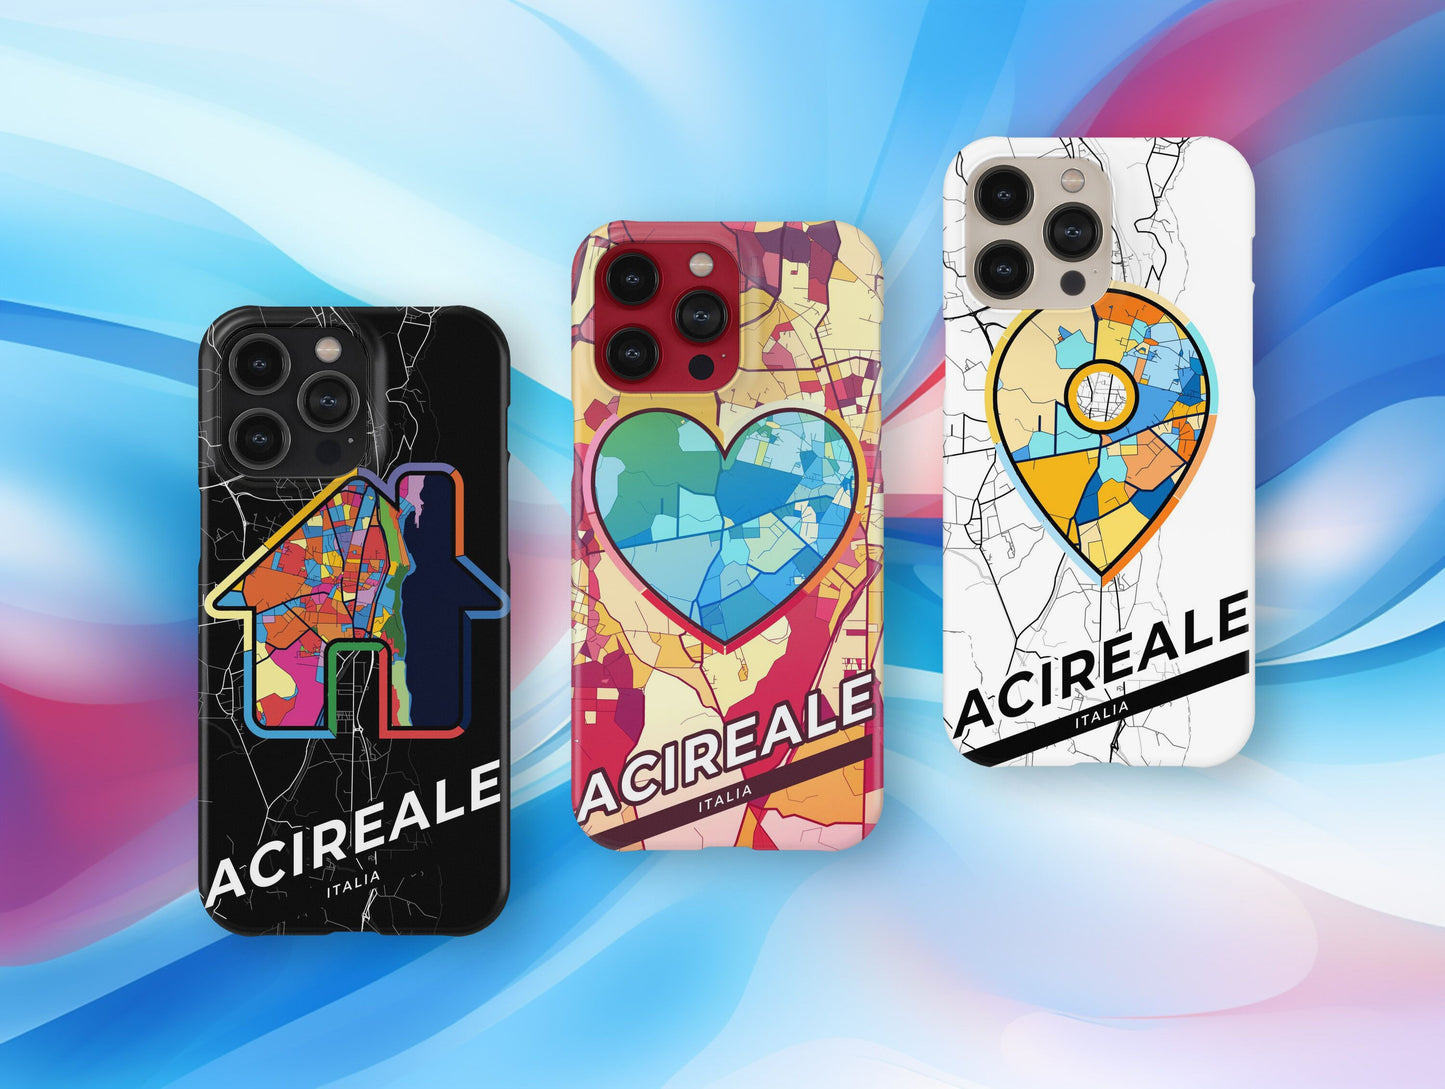 Acireale Italy slim phone case with colorful icon. Birthday, wedding or housewarming gift. Couple match cases.